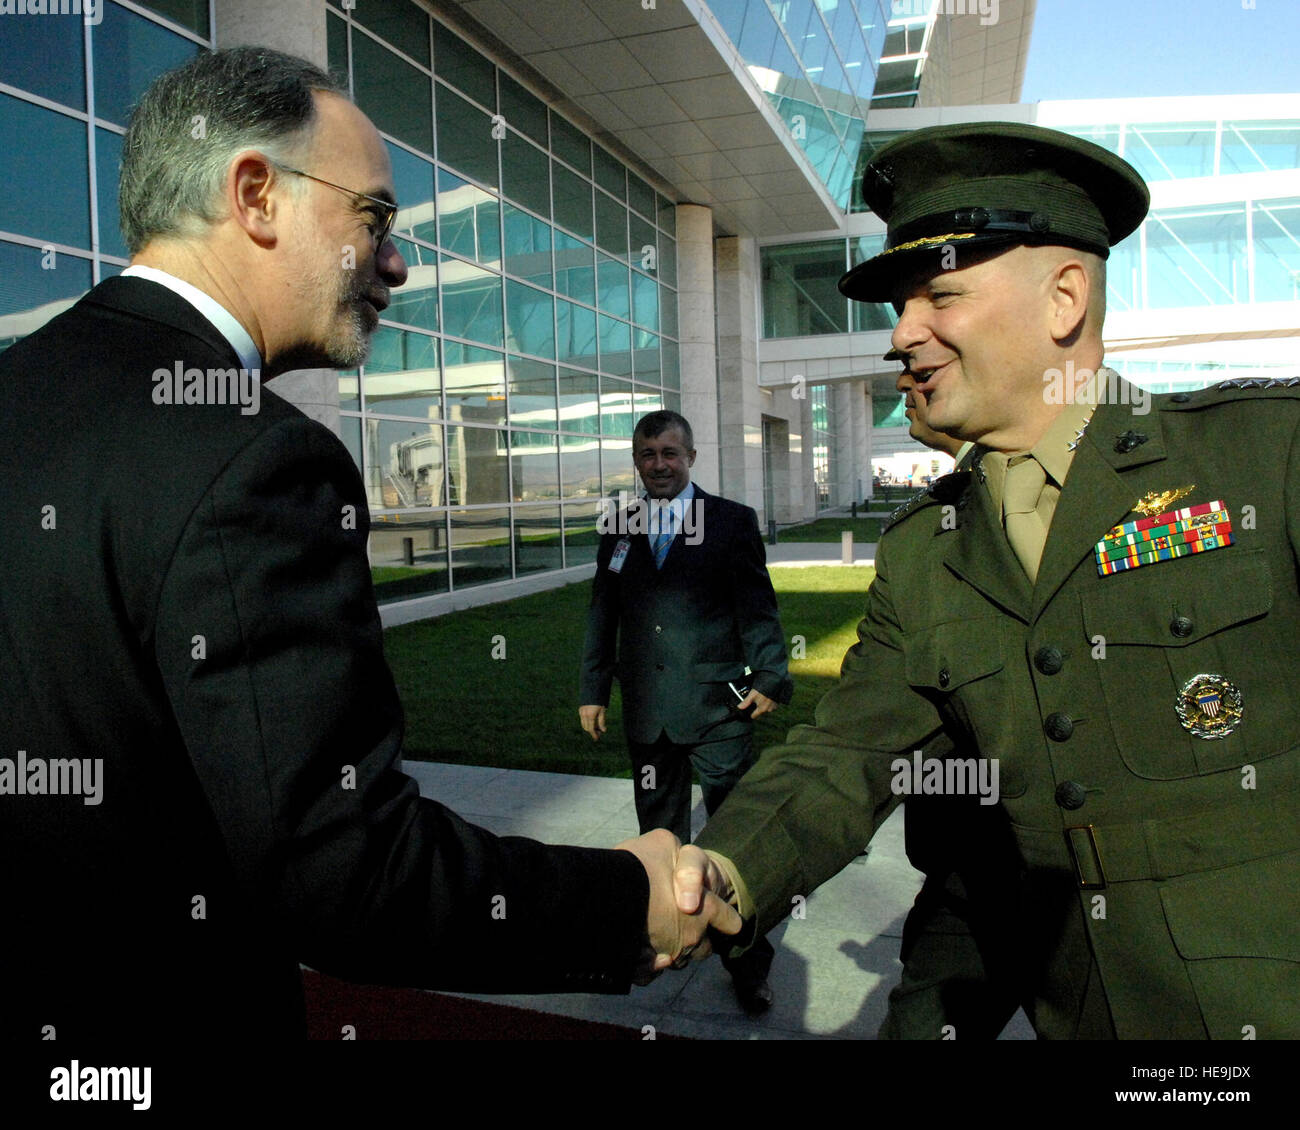 Vice Chairman of the Joint Chiefs of Staff Marine Gen. James E. Cartwright meets with U.S. Ambassador to Turkey Ross Wilson after landing in Ankara, Turkey, July 3, 2008. Cartwright visited Turkey to meet with his counterparts on U.S.-Turkish security matters.  Air Force Master Sgt. Adam M. Stump. (Released) Stock Photo